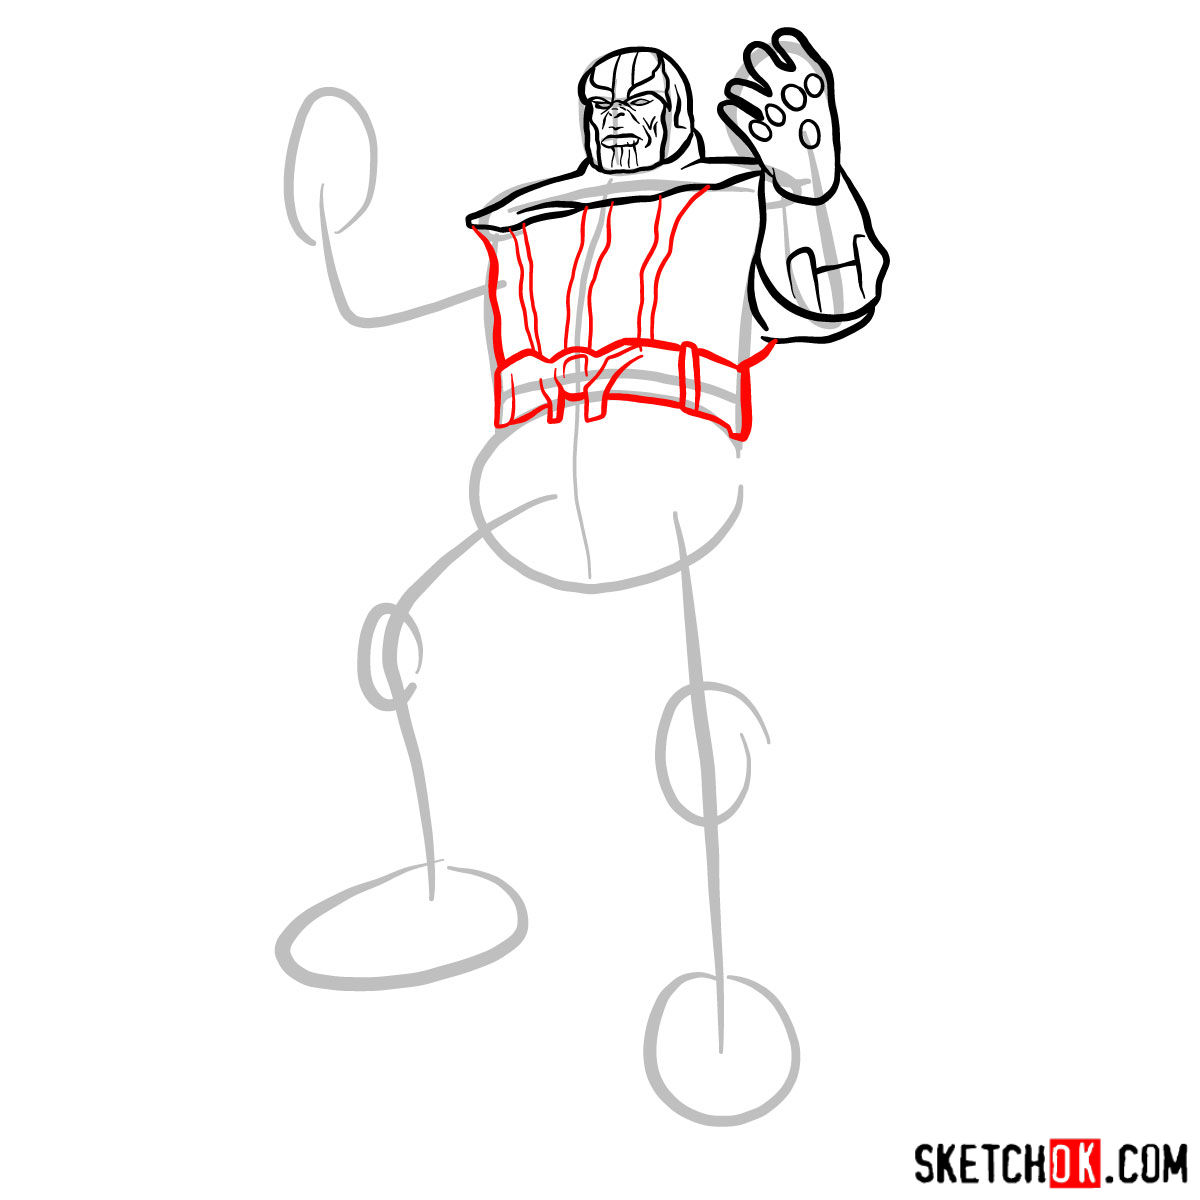 How to draw Thanos with 5 Infinity Stones - step 09